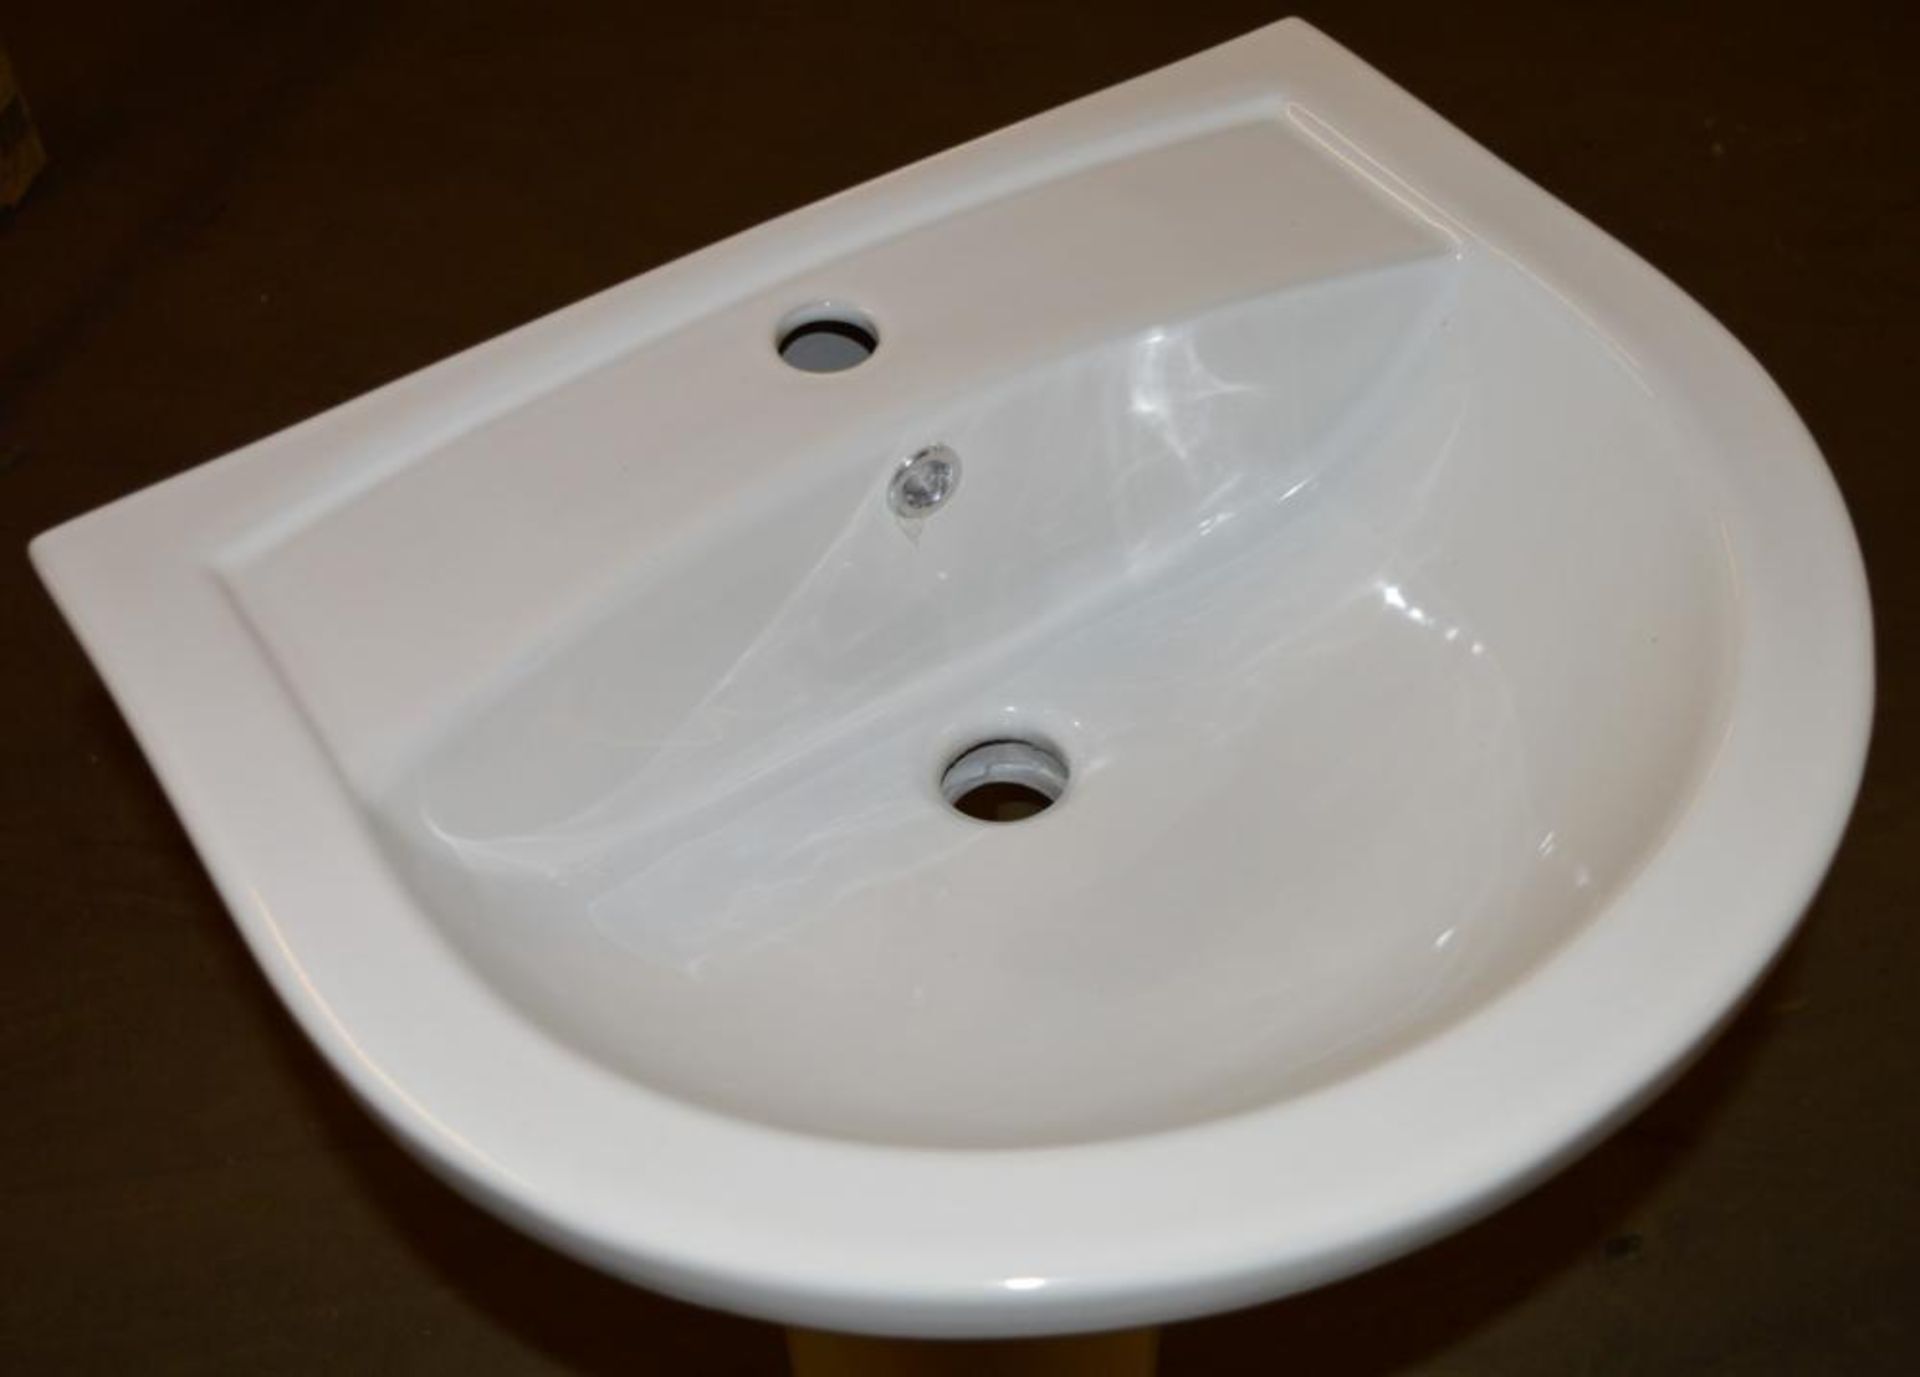 1 x Contemporary Sink Basin With Pedestal - Unused Boxed Stock - CL190 - Ref GIL036 - Location: - Image 2 of 3